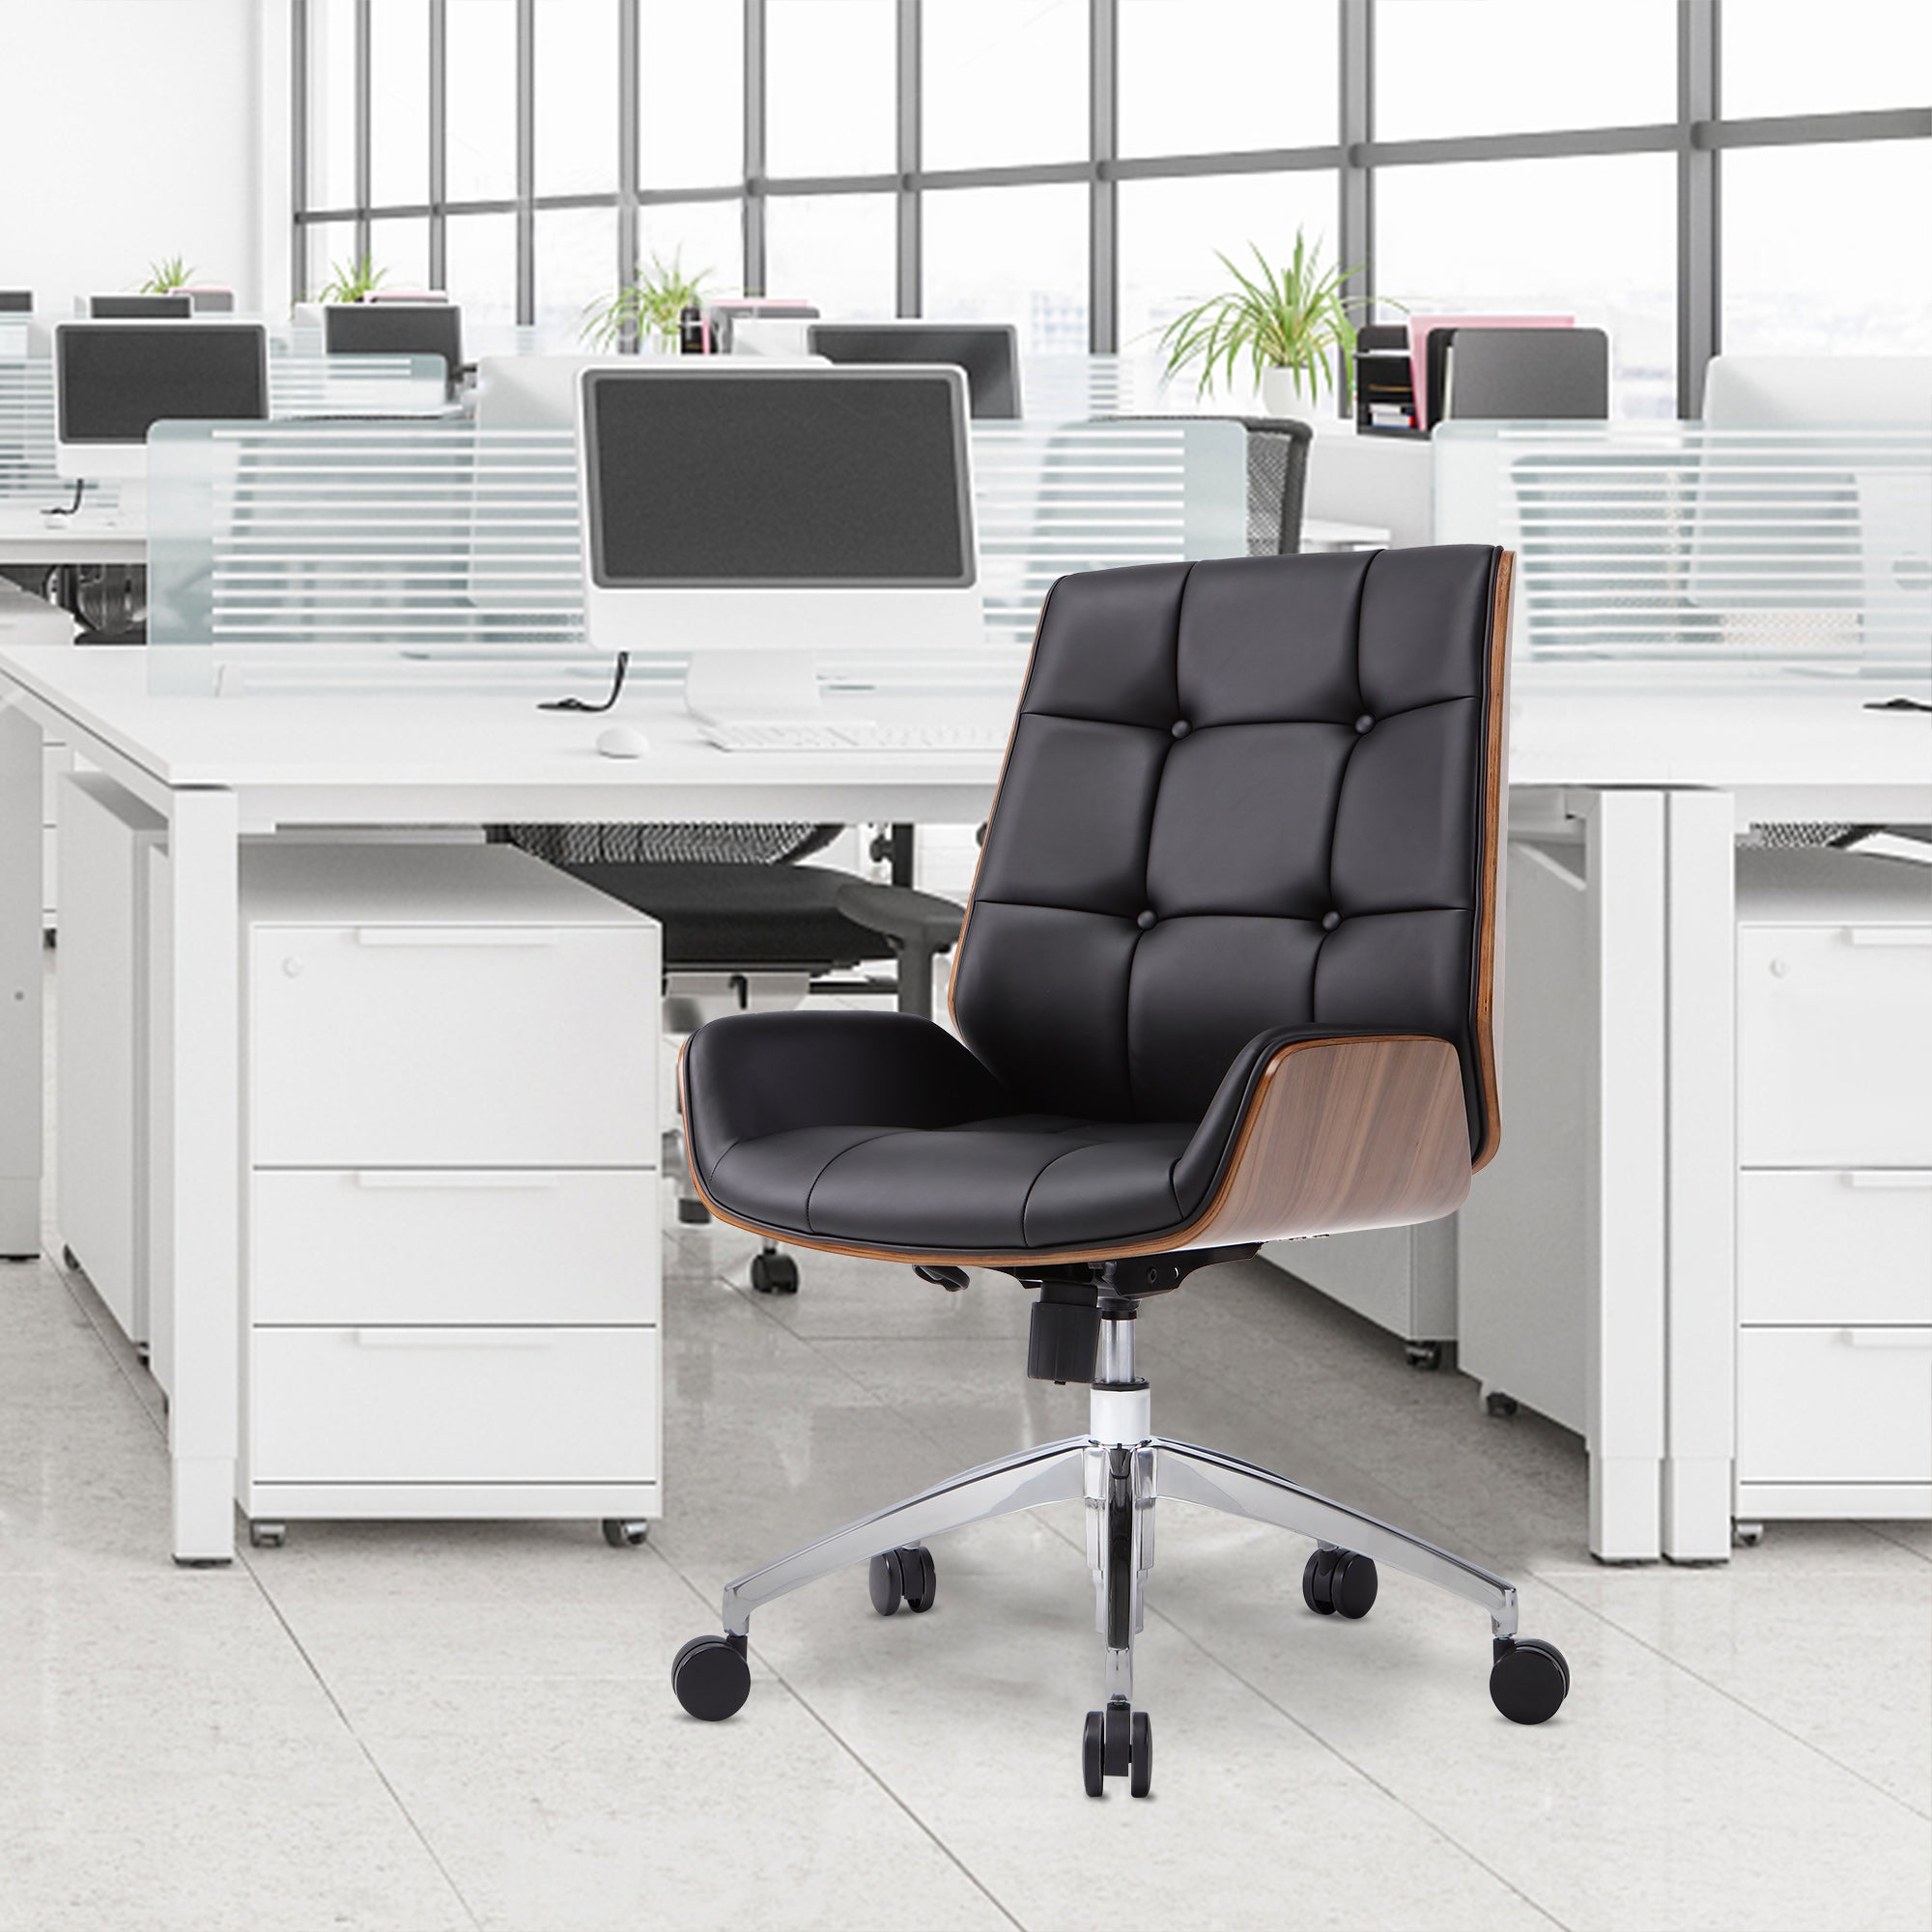 Executive Ergonomic Office Leather Chairs with Tilt and Height Adjustable, Black